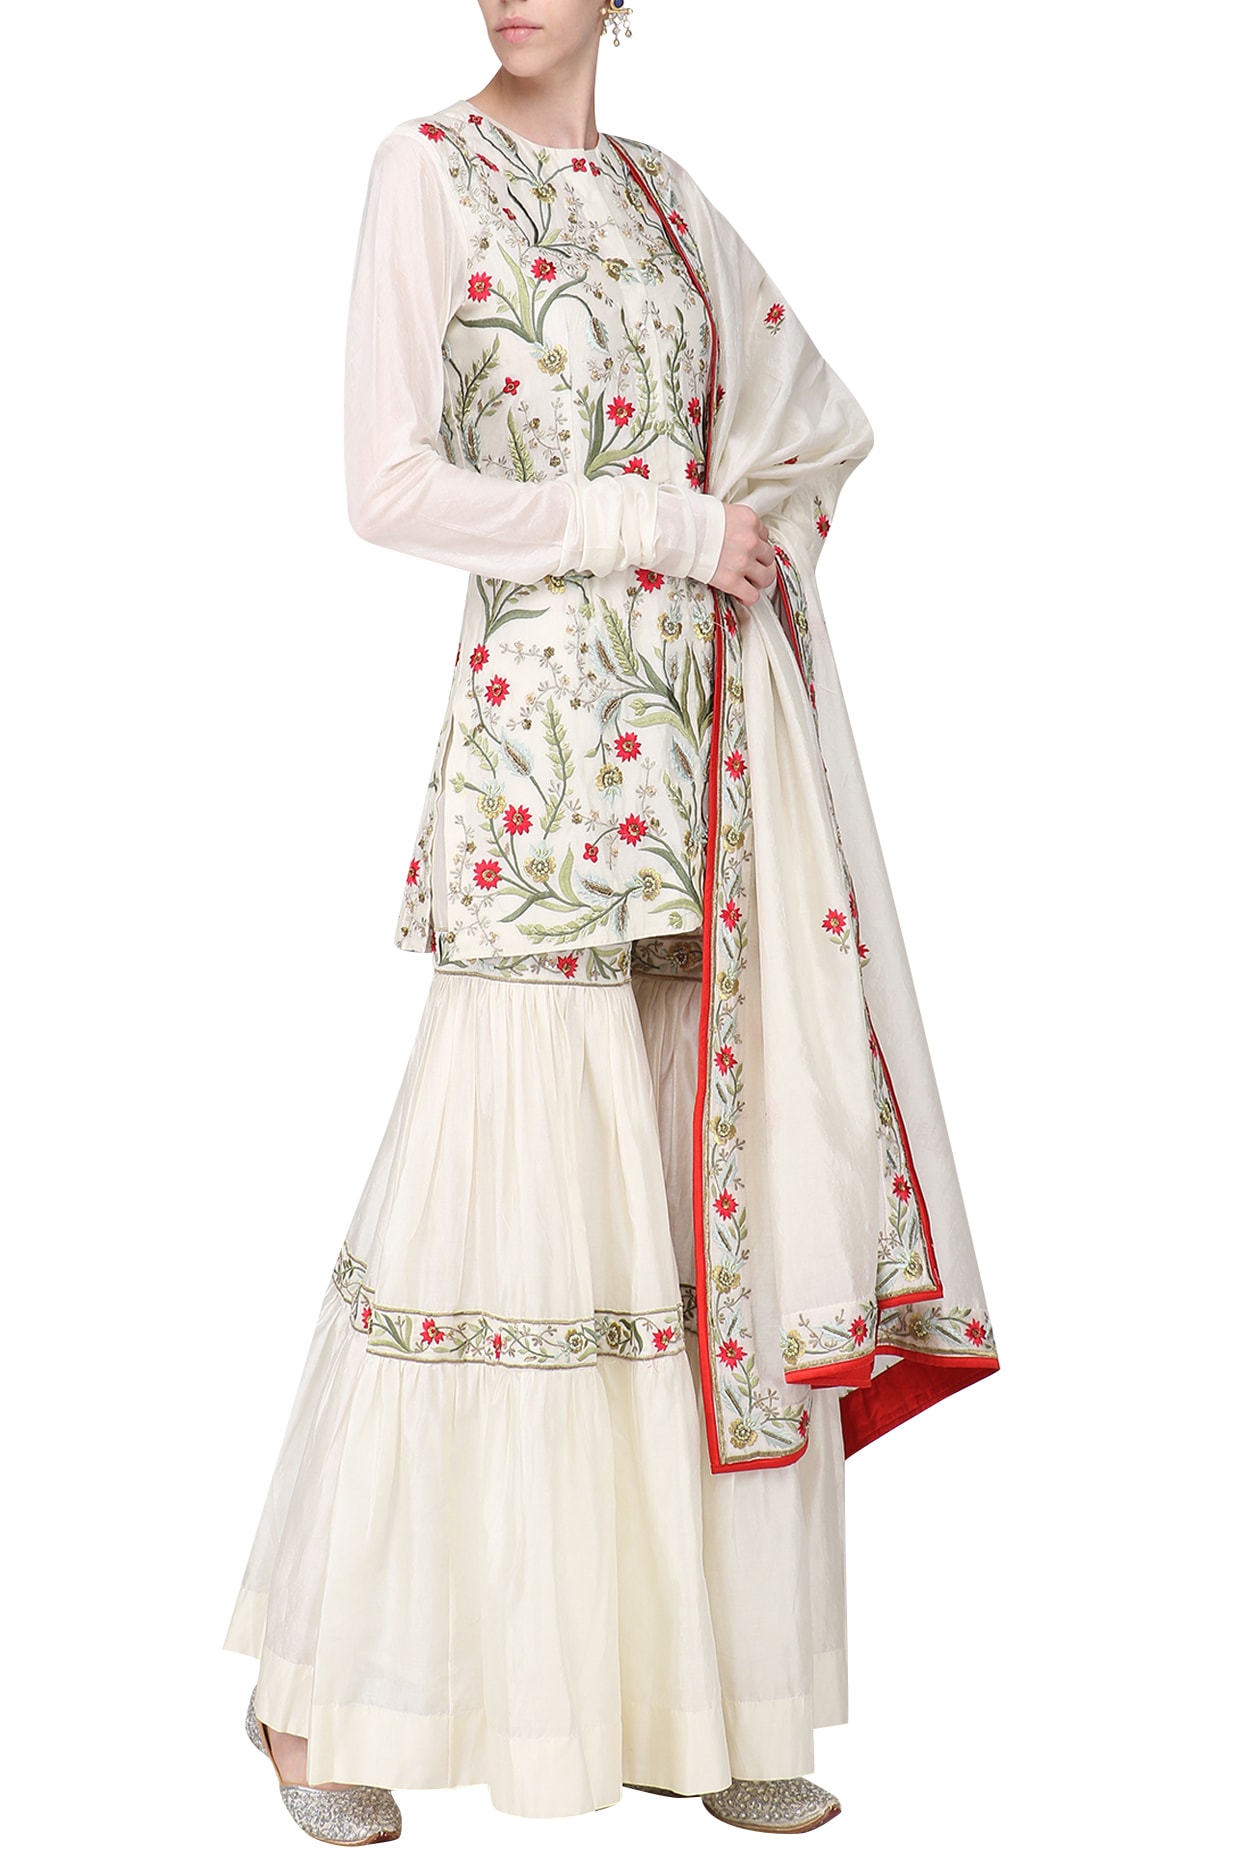 Sharara With Golden Piping-Pearl White